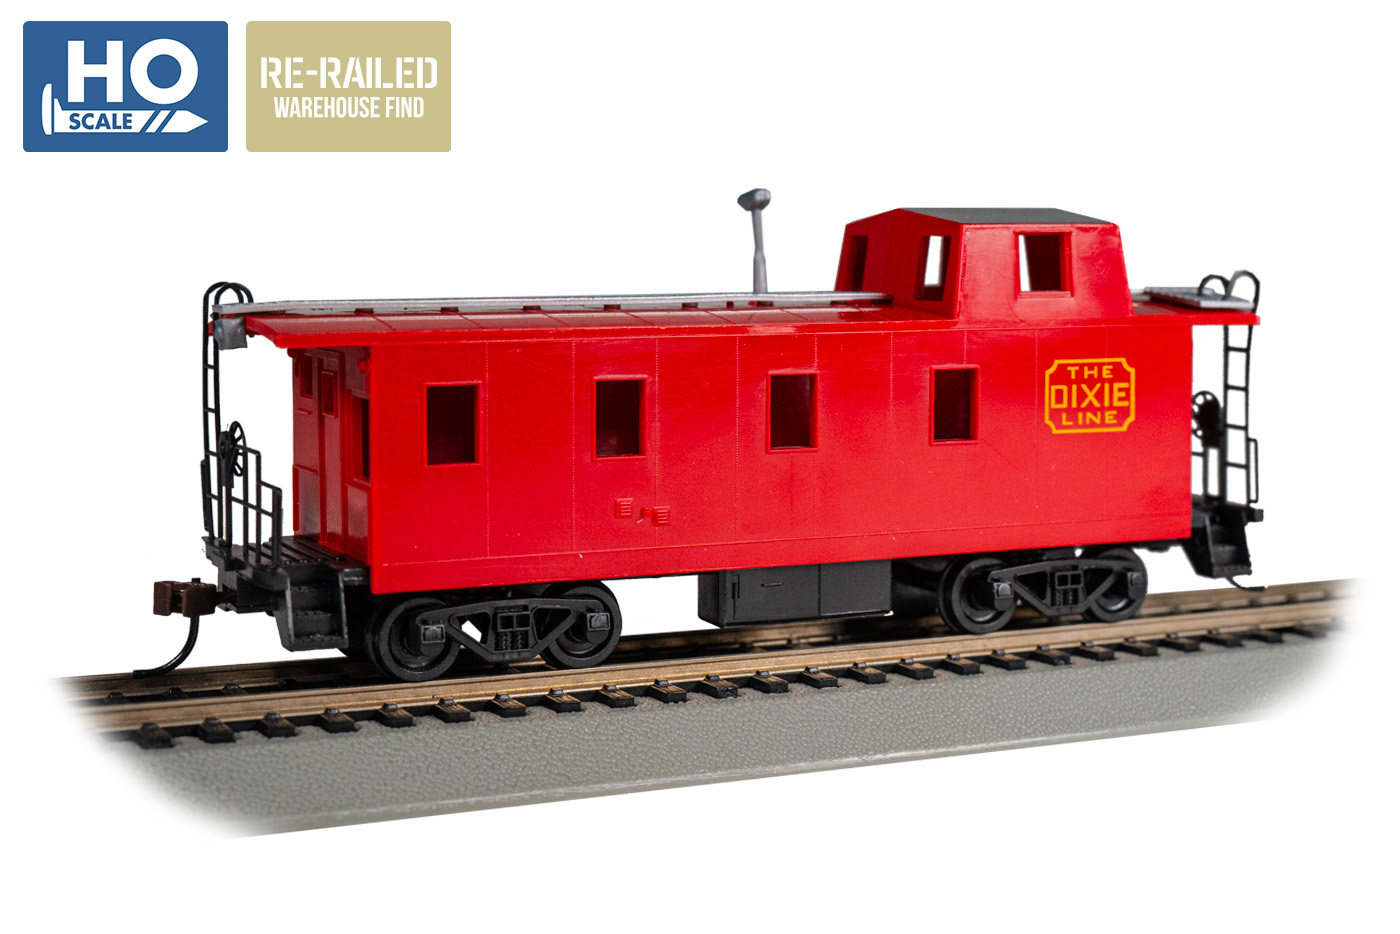 Offset Cupola Caboose - The Dixie Line